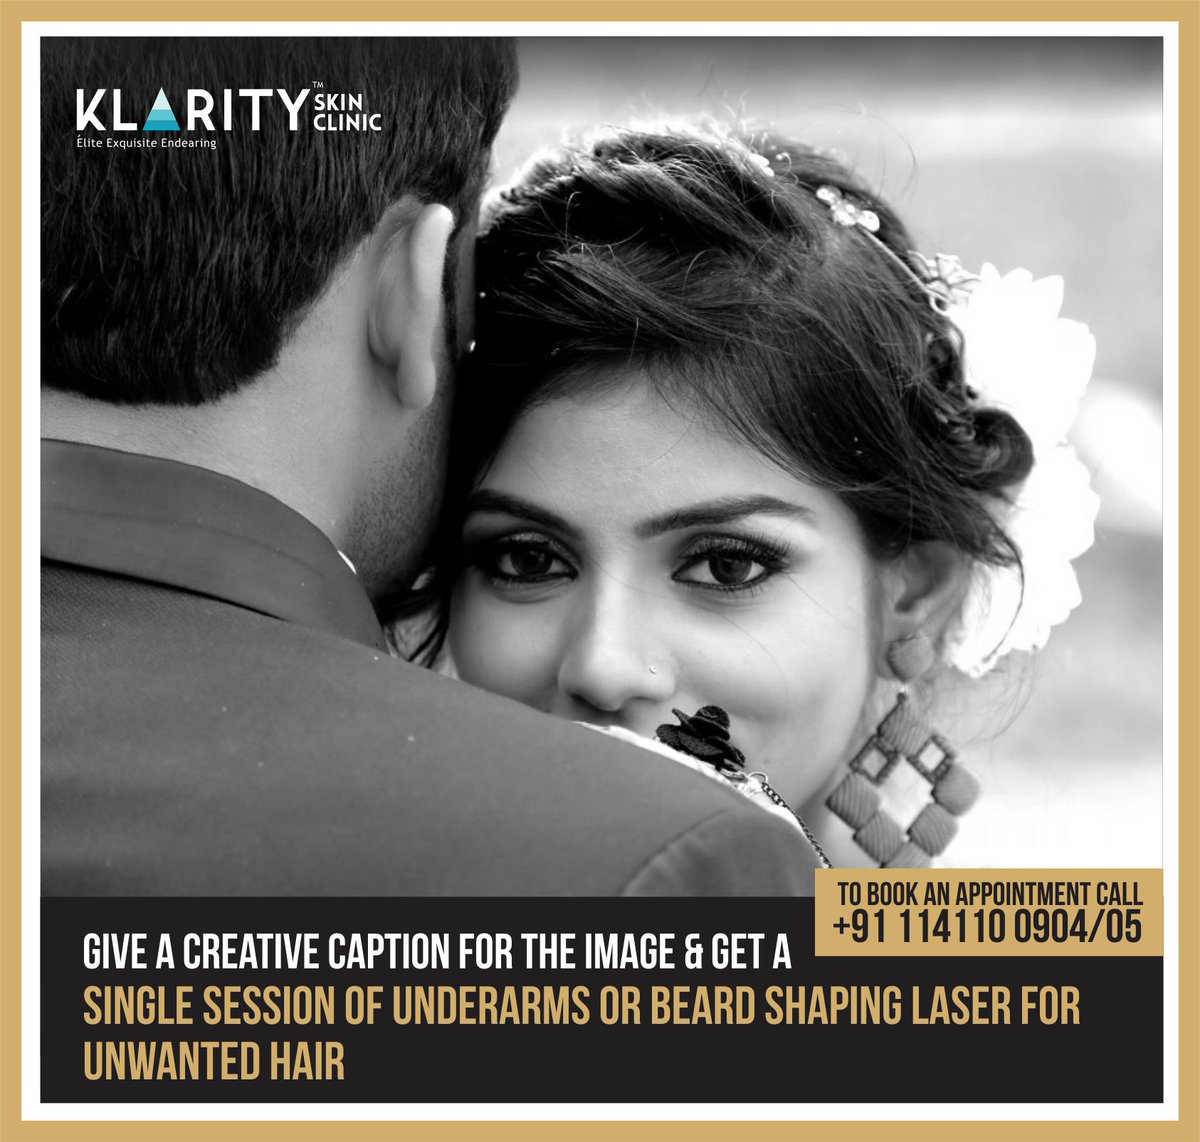 SOMETIMES GOOD THINGS IN LIFE DO COME EASY!
All you have to do is be creative and give us a funny/ serious /heart warming caption and we give you an awesome deal for FREE!!!

Are you ready for the challenge?

#offersatklarity #creativecaption #gk2 #newdelhi #klarityskinclinic